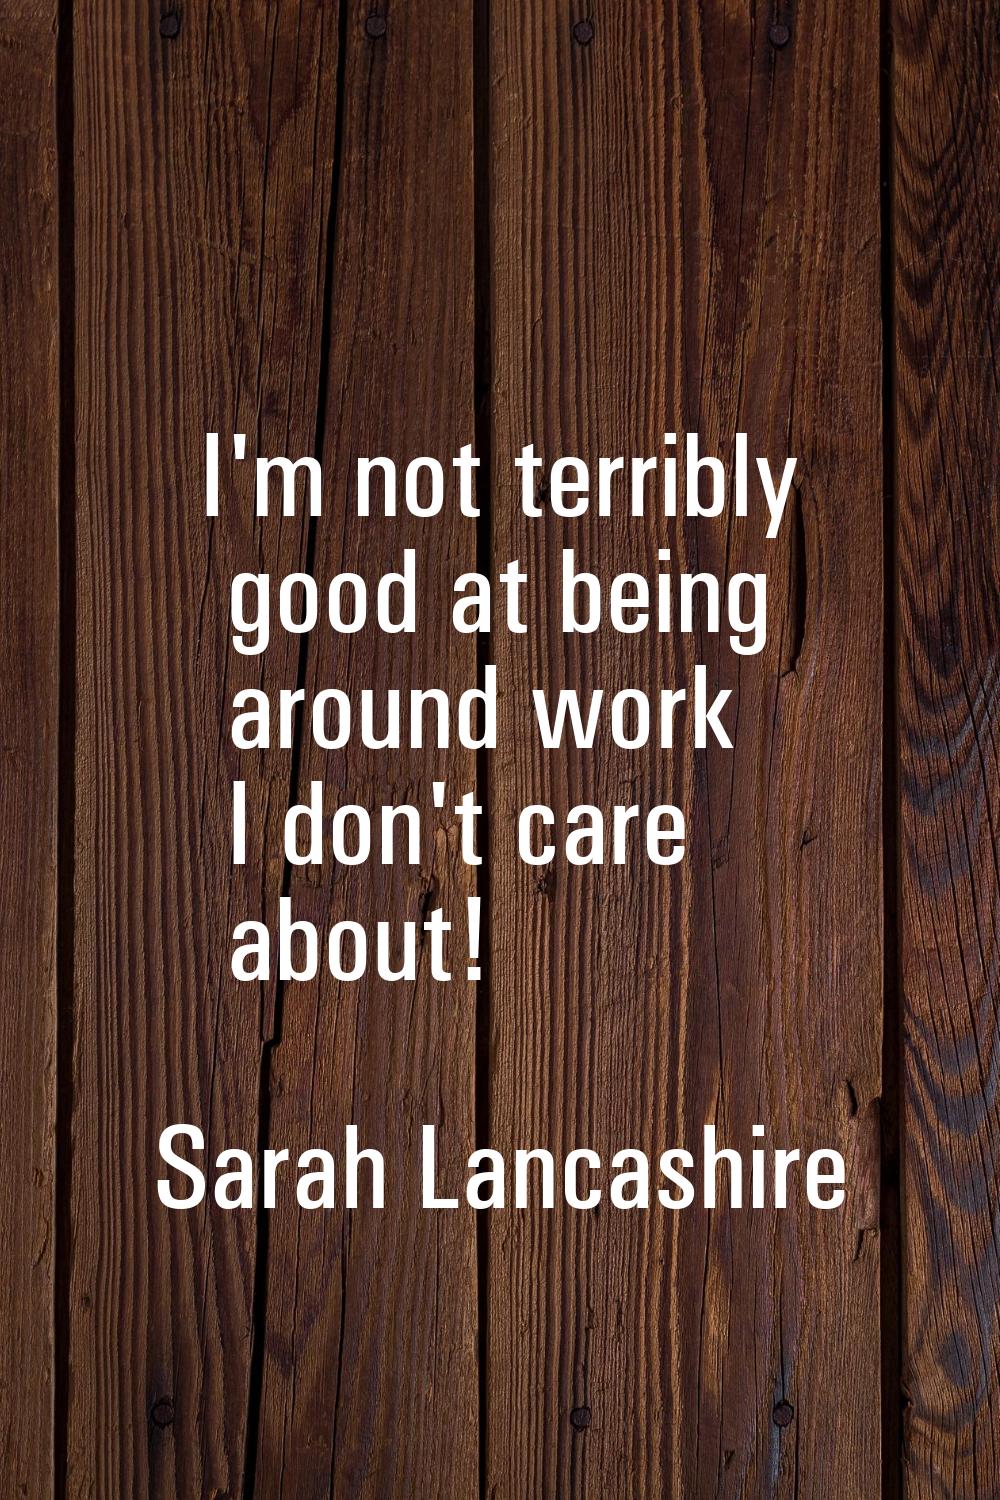 I'm not terribly good at being around work I don't care about!